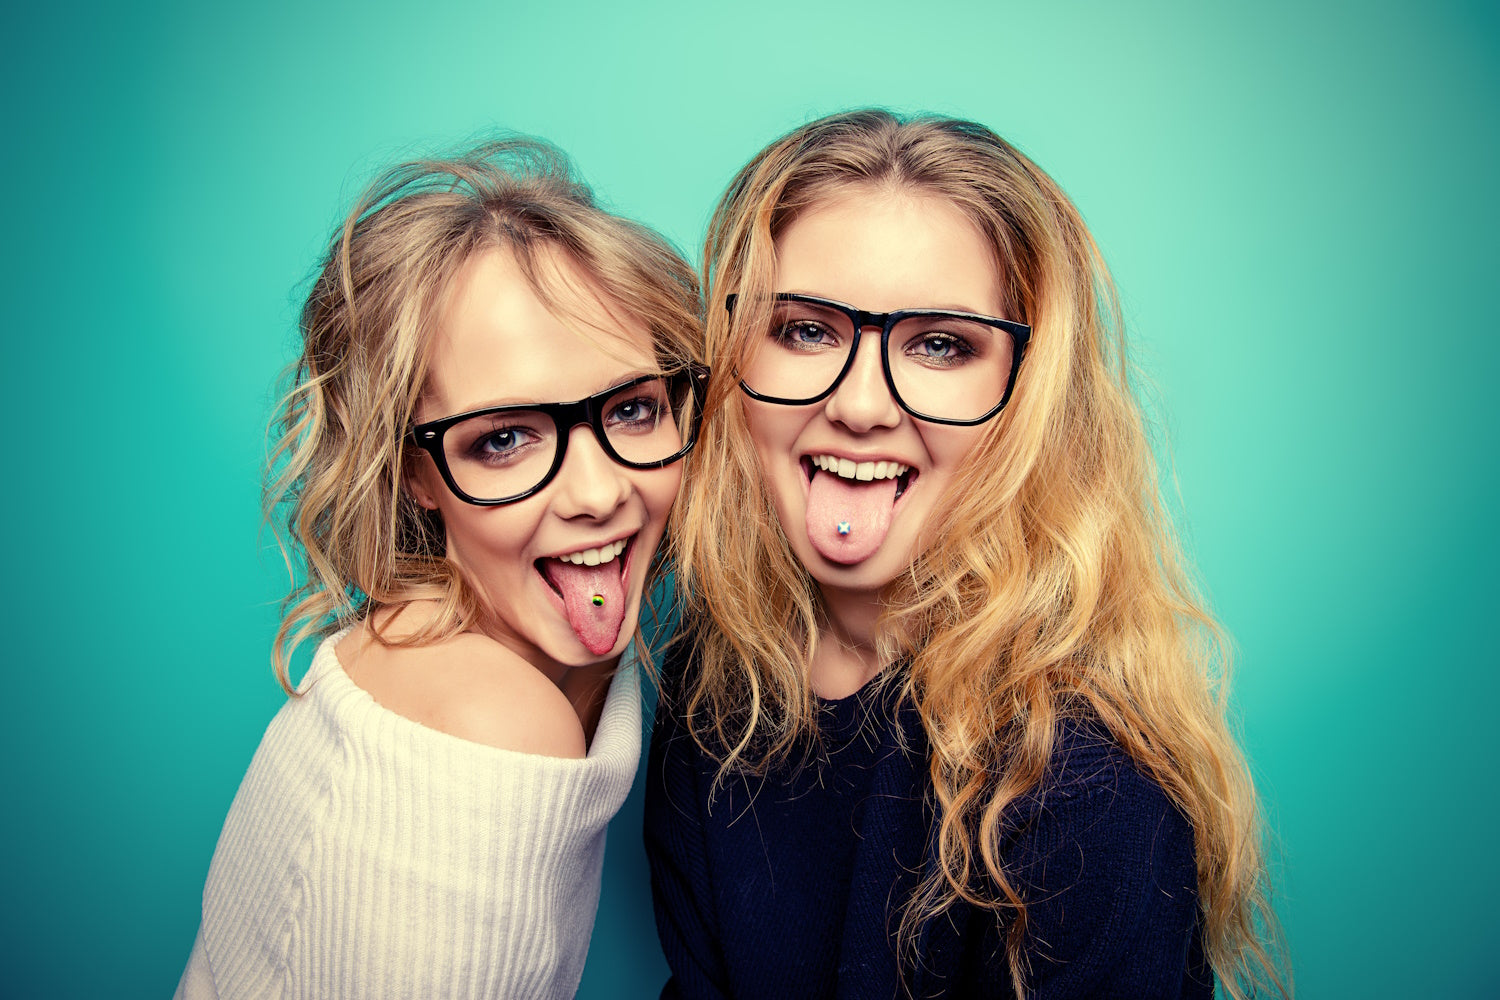 Two women each with their tongue sticking out showing their tongue piercings.